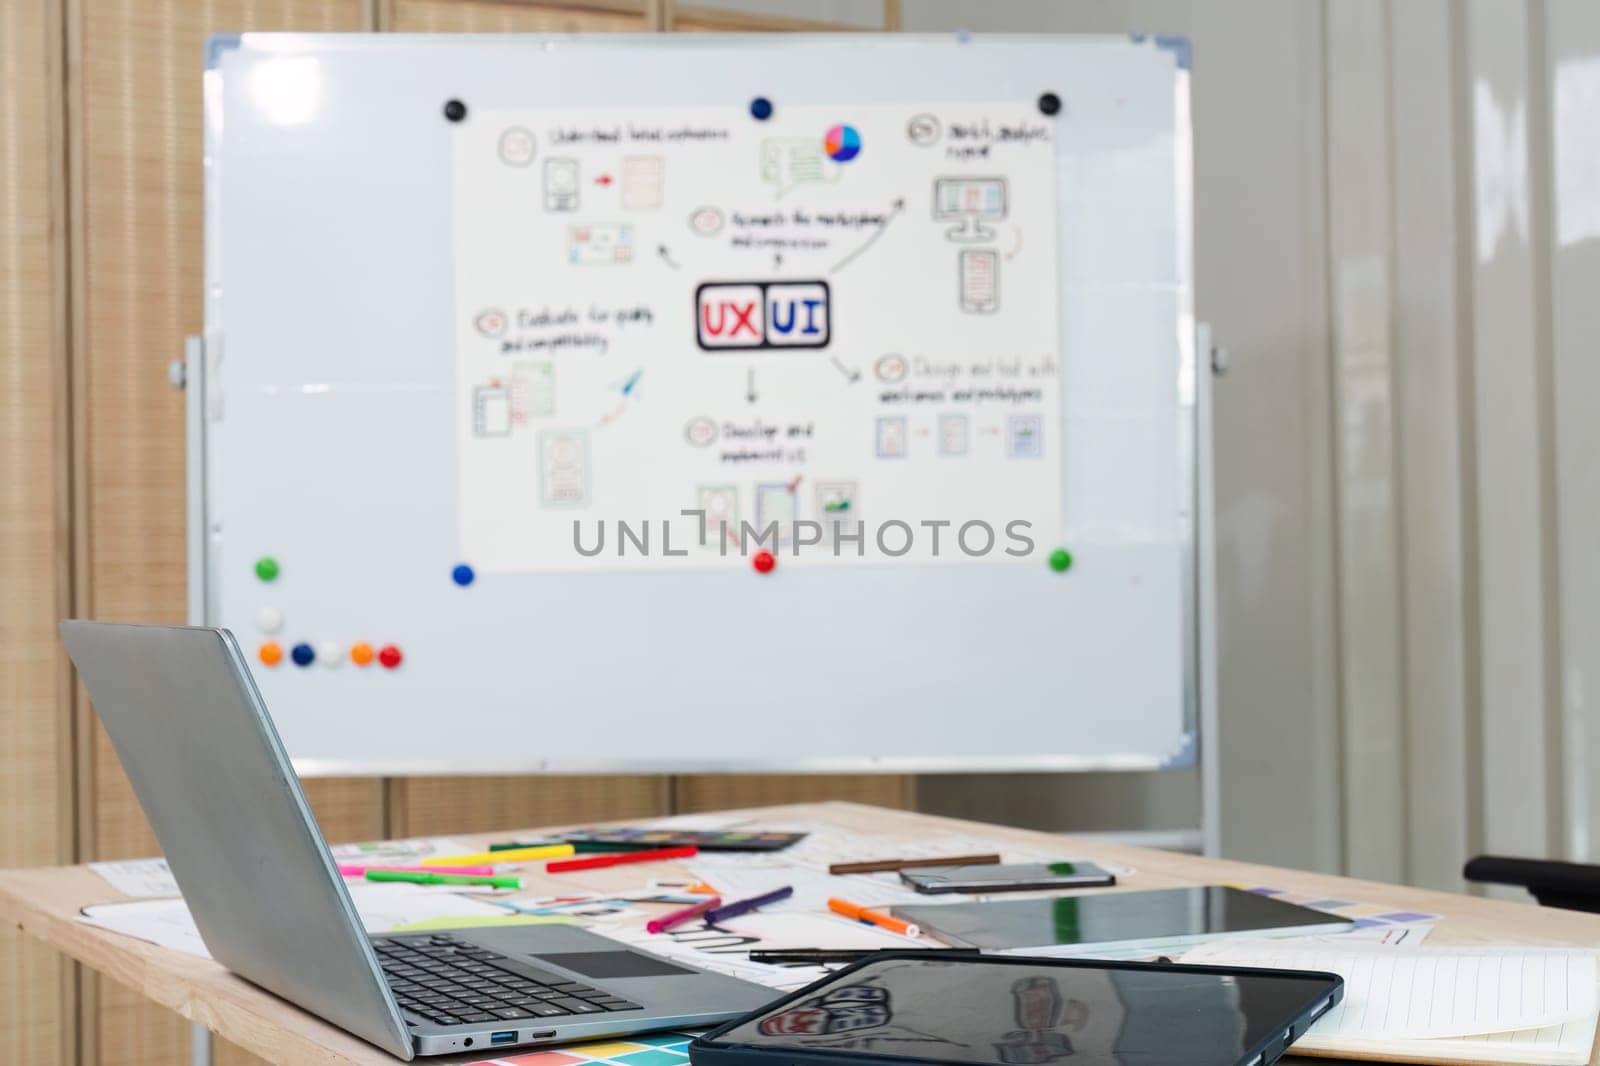 A white board with a diagram on it and a laptop on a desk. The diagram is labeled UXUT